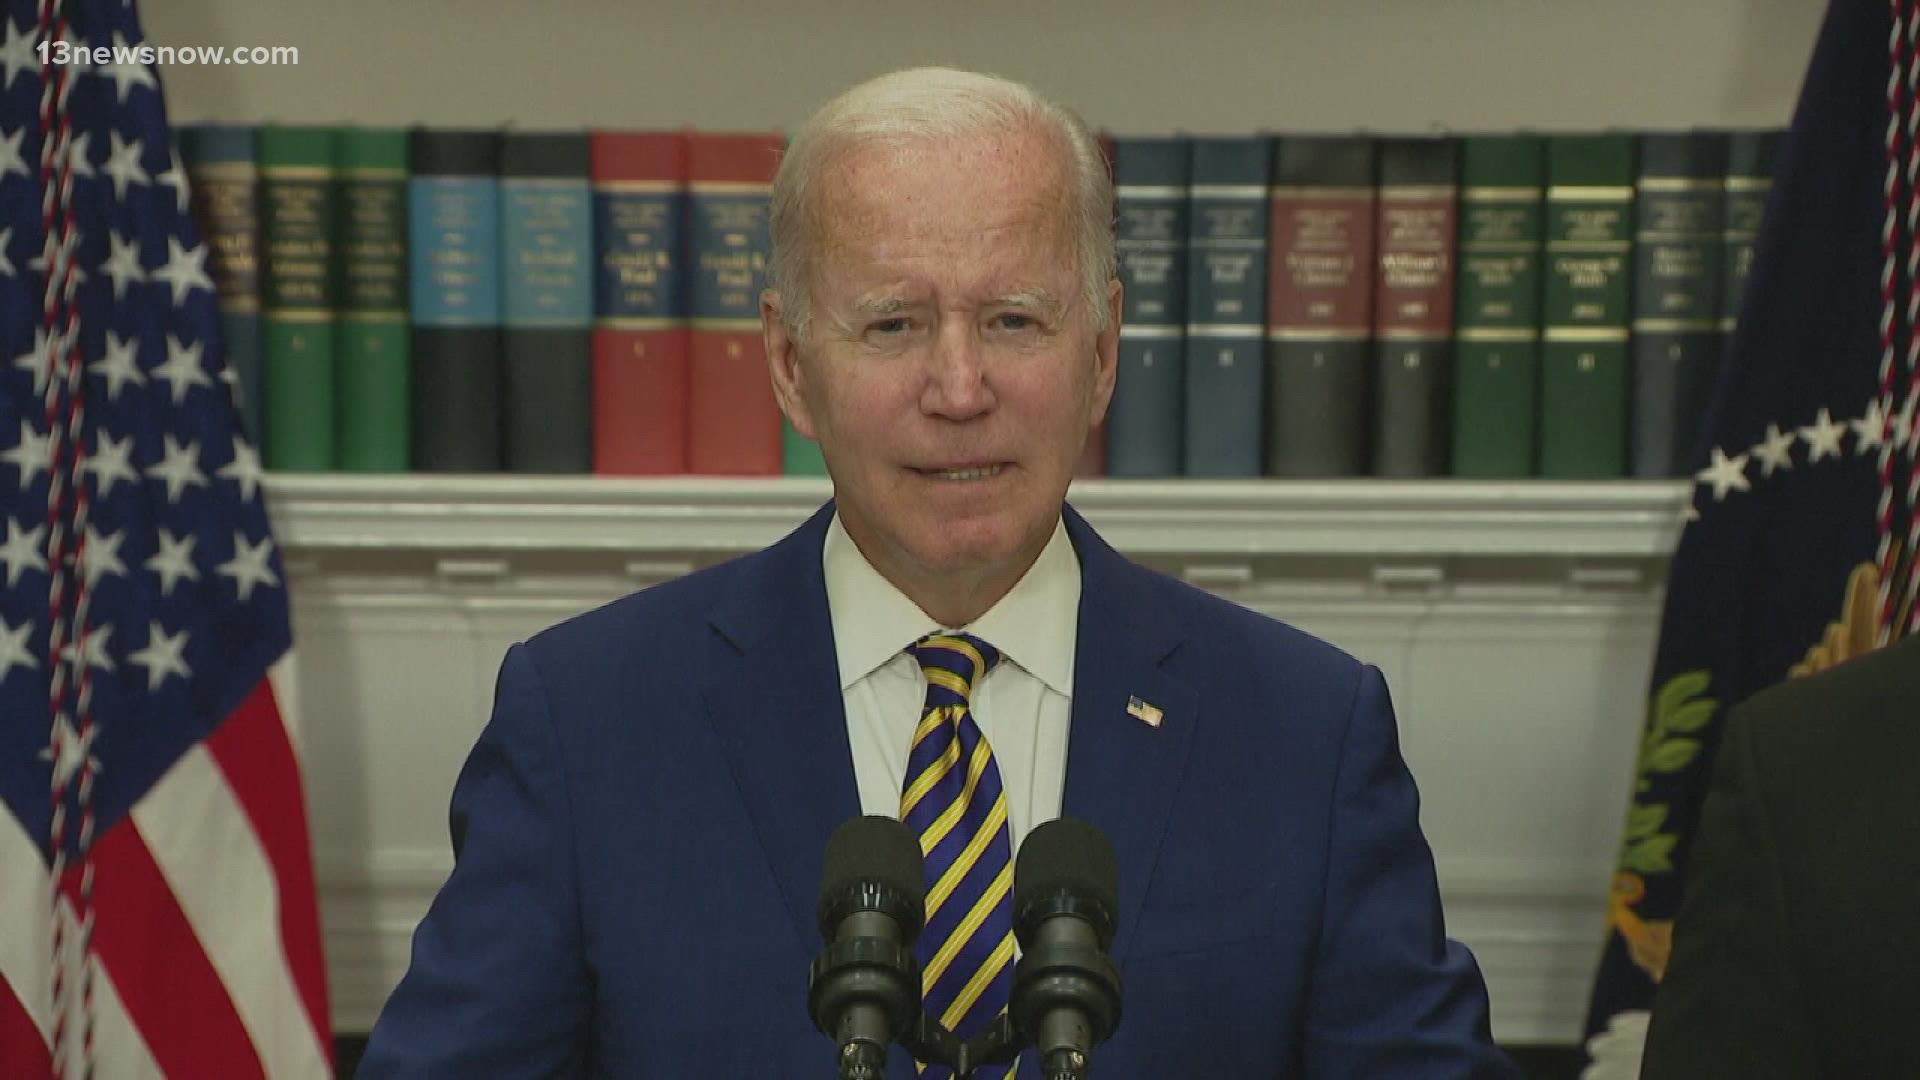 President Joe Biden announced detailed plans to deliver on a campaign promise to provide $10,000 in student debt cancellation for millions of Americans.